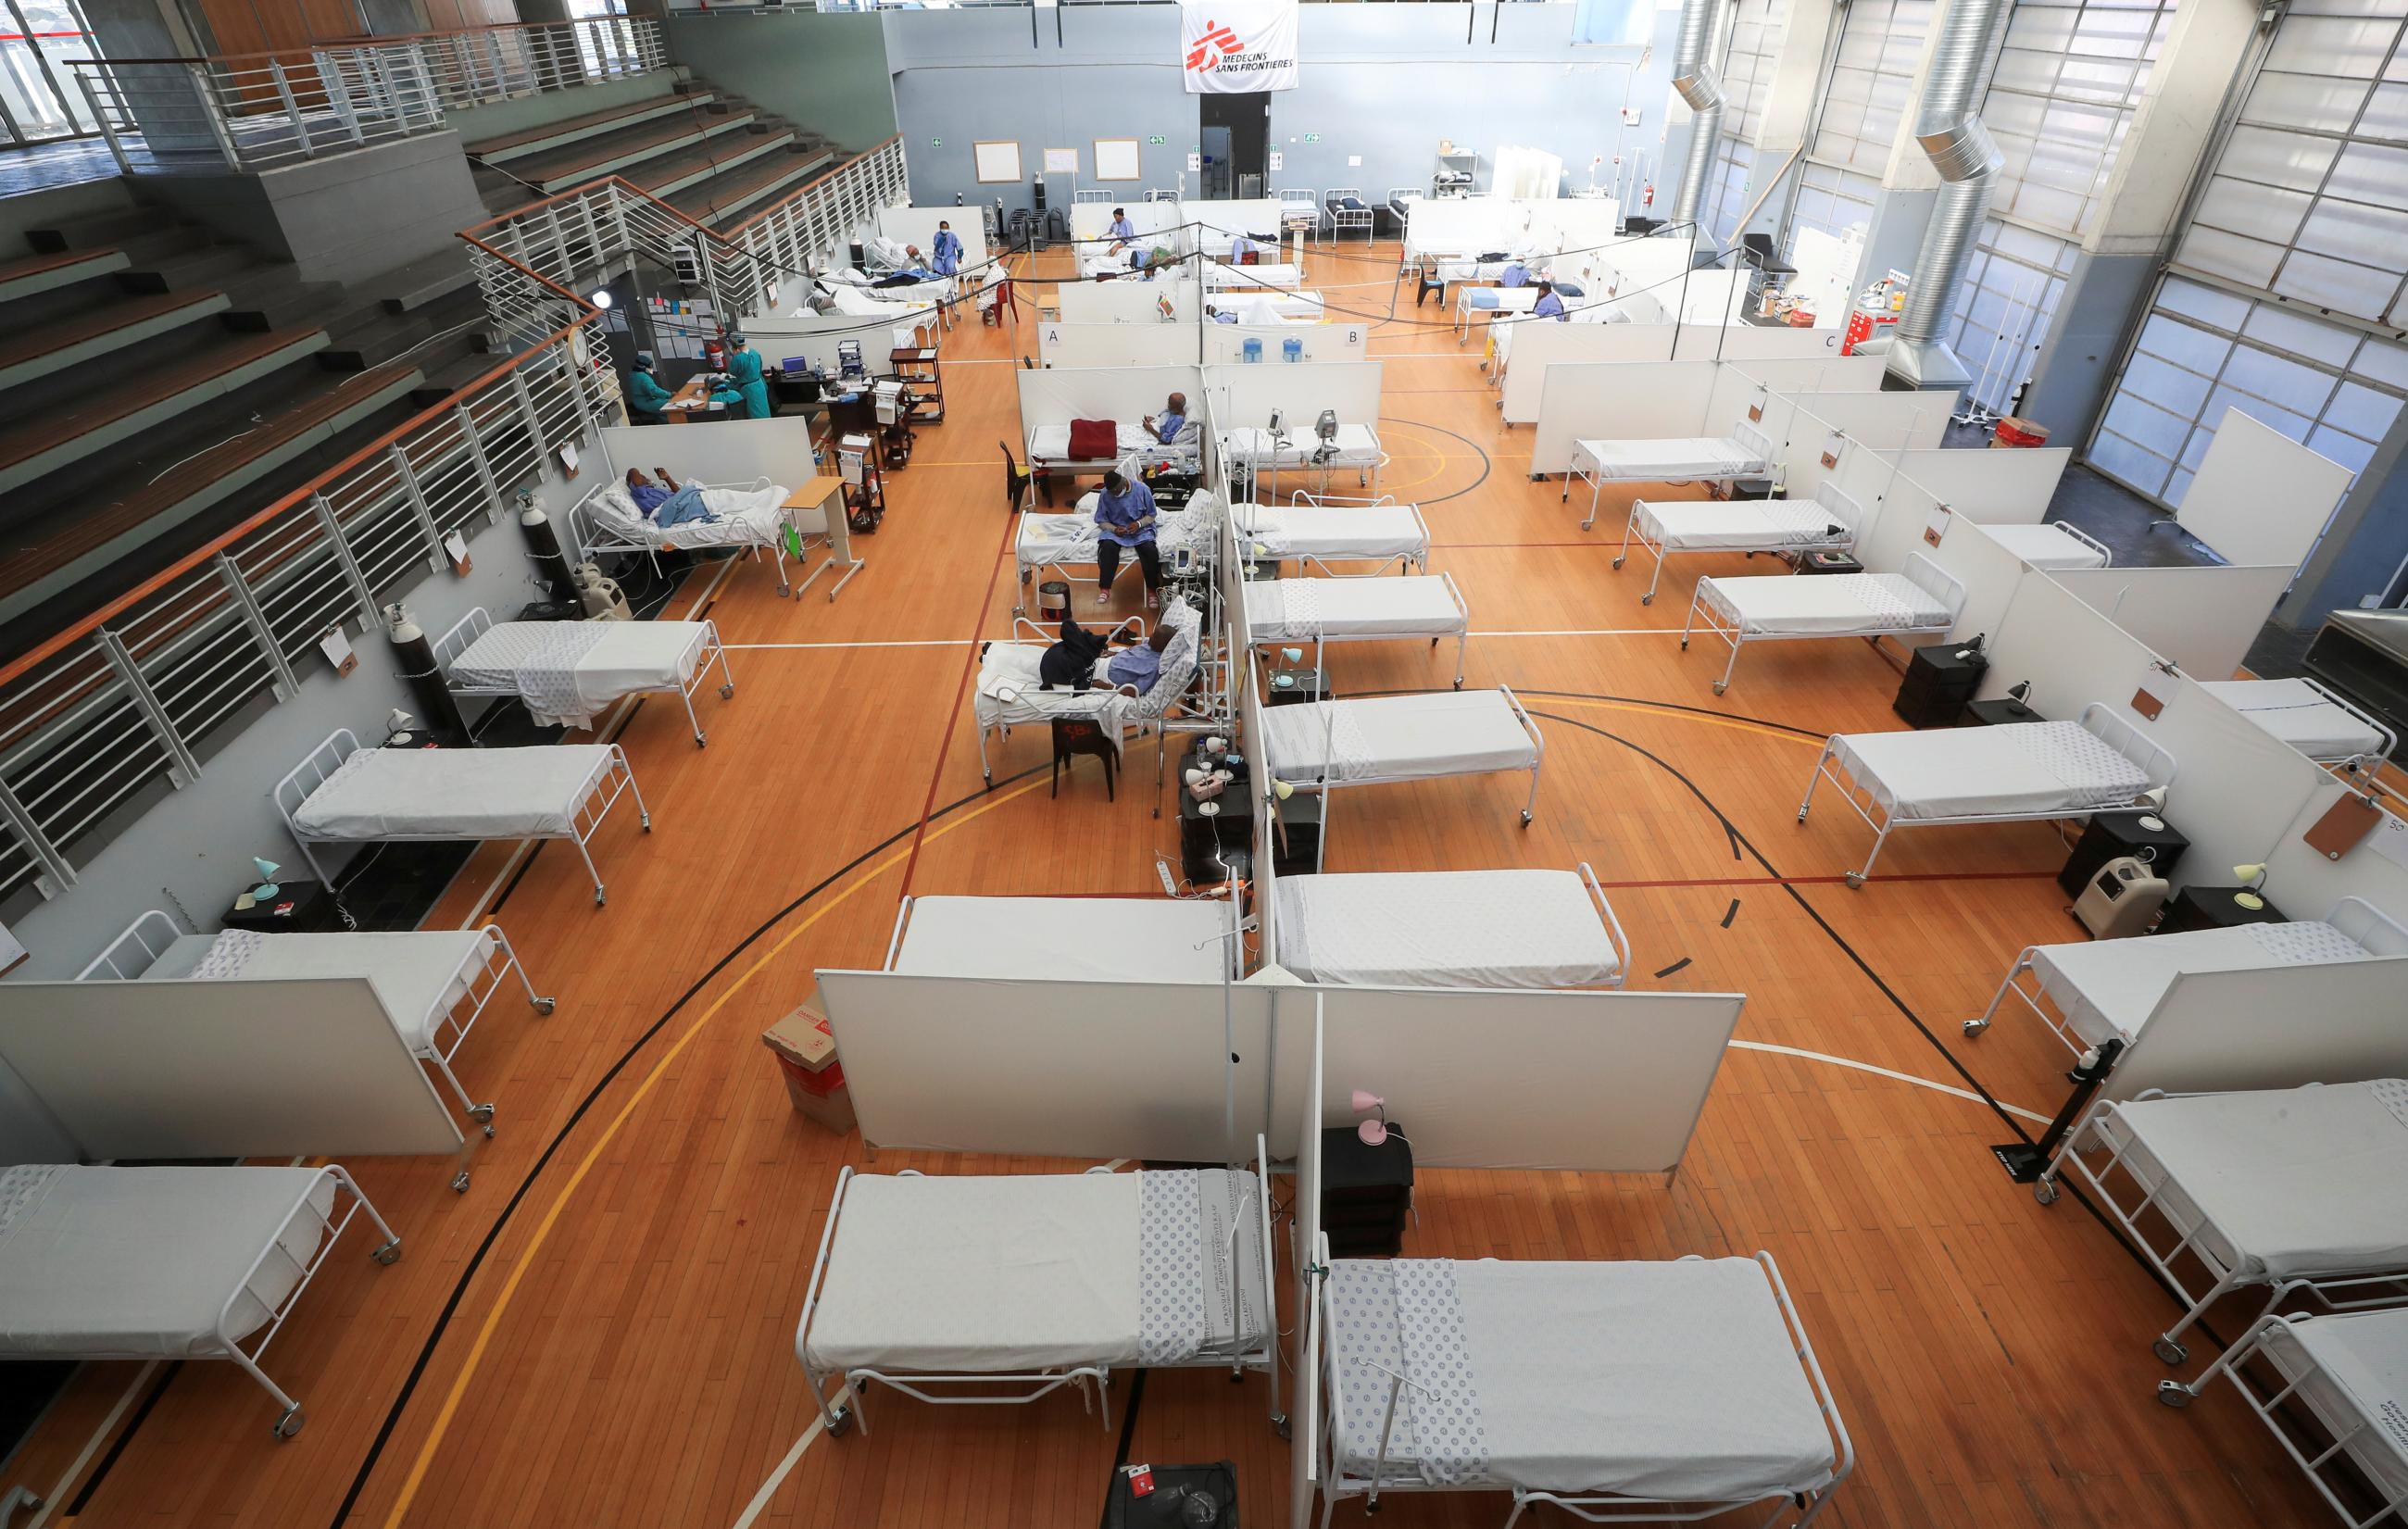 Beds are seen at a temporary field hospital set up in a sports complex by Medecins Sans Frontieres (MSF) during the coronavirus disease (COVID-19) outbreak in Khayelitsha township near Cape Town, South Africa, July 21, 2020